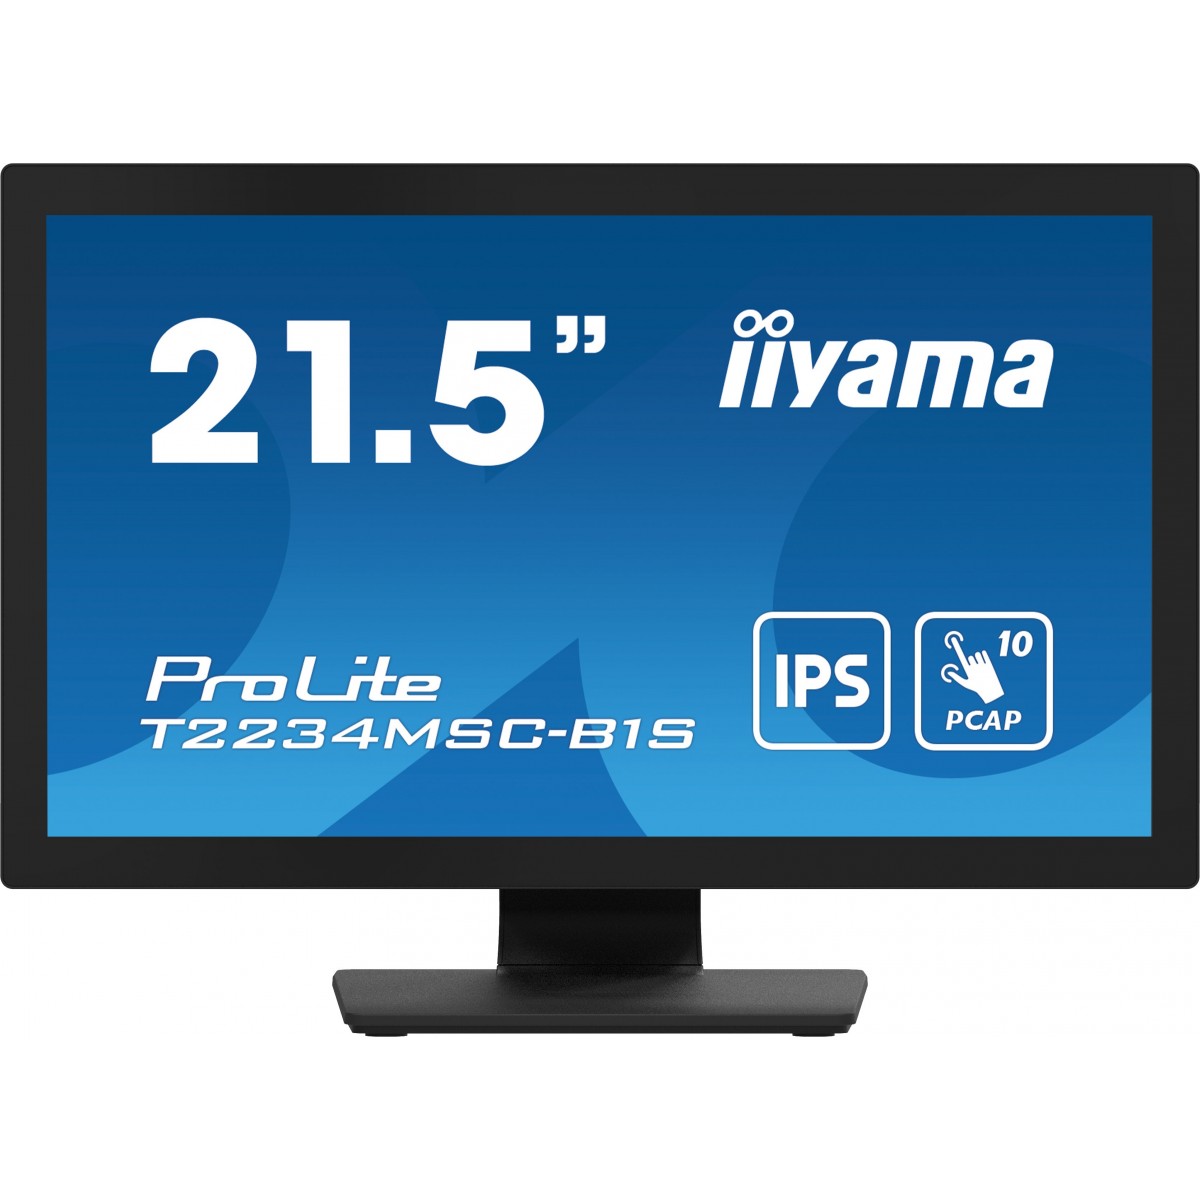 Iiyama 21.5 PCAP Bezel Free Front Speakers 10P Touch with Anti-Finger print coating IPS - Flat Screen - 54.6 cm